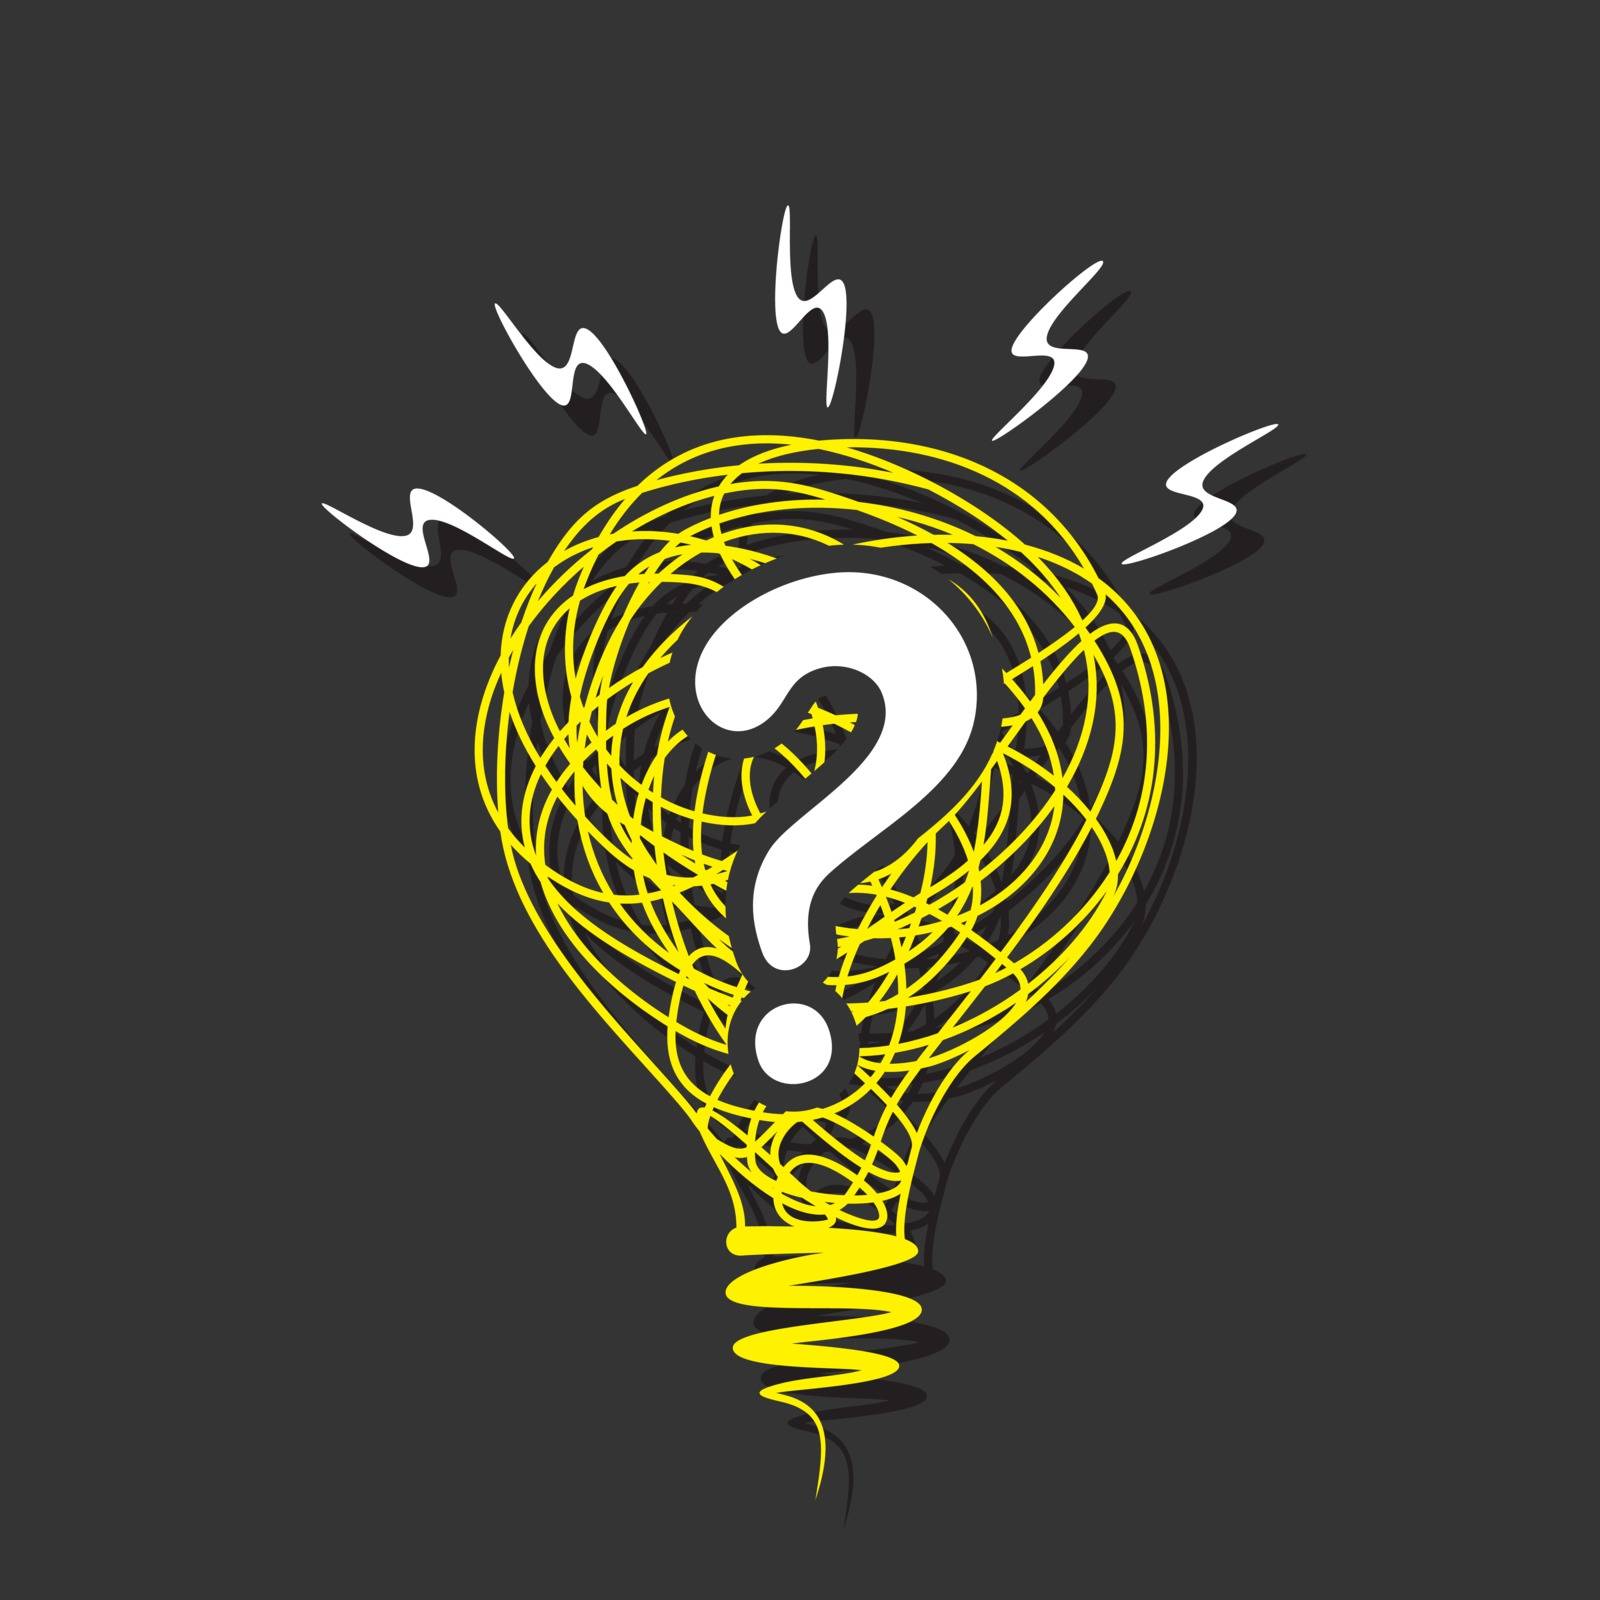 question mark in the sketch bulb concept vector